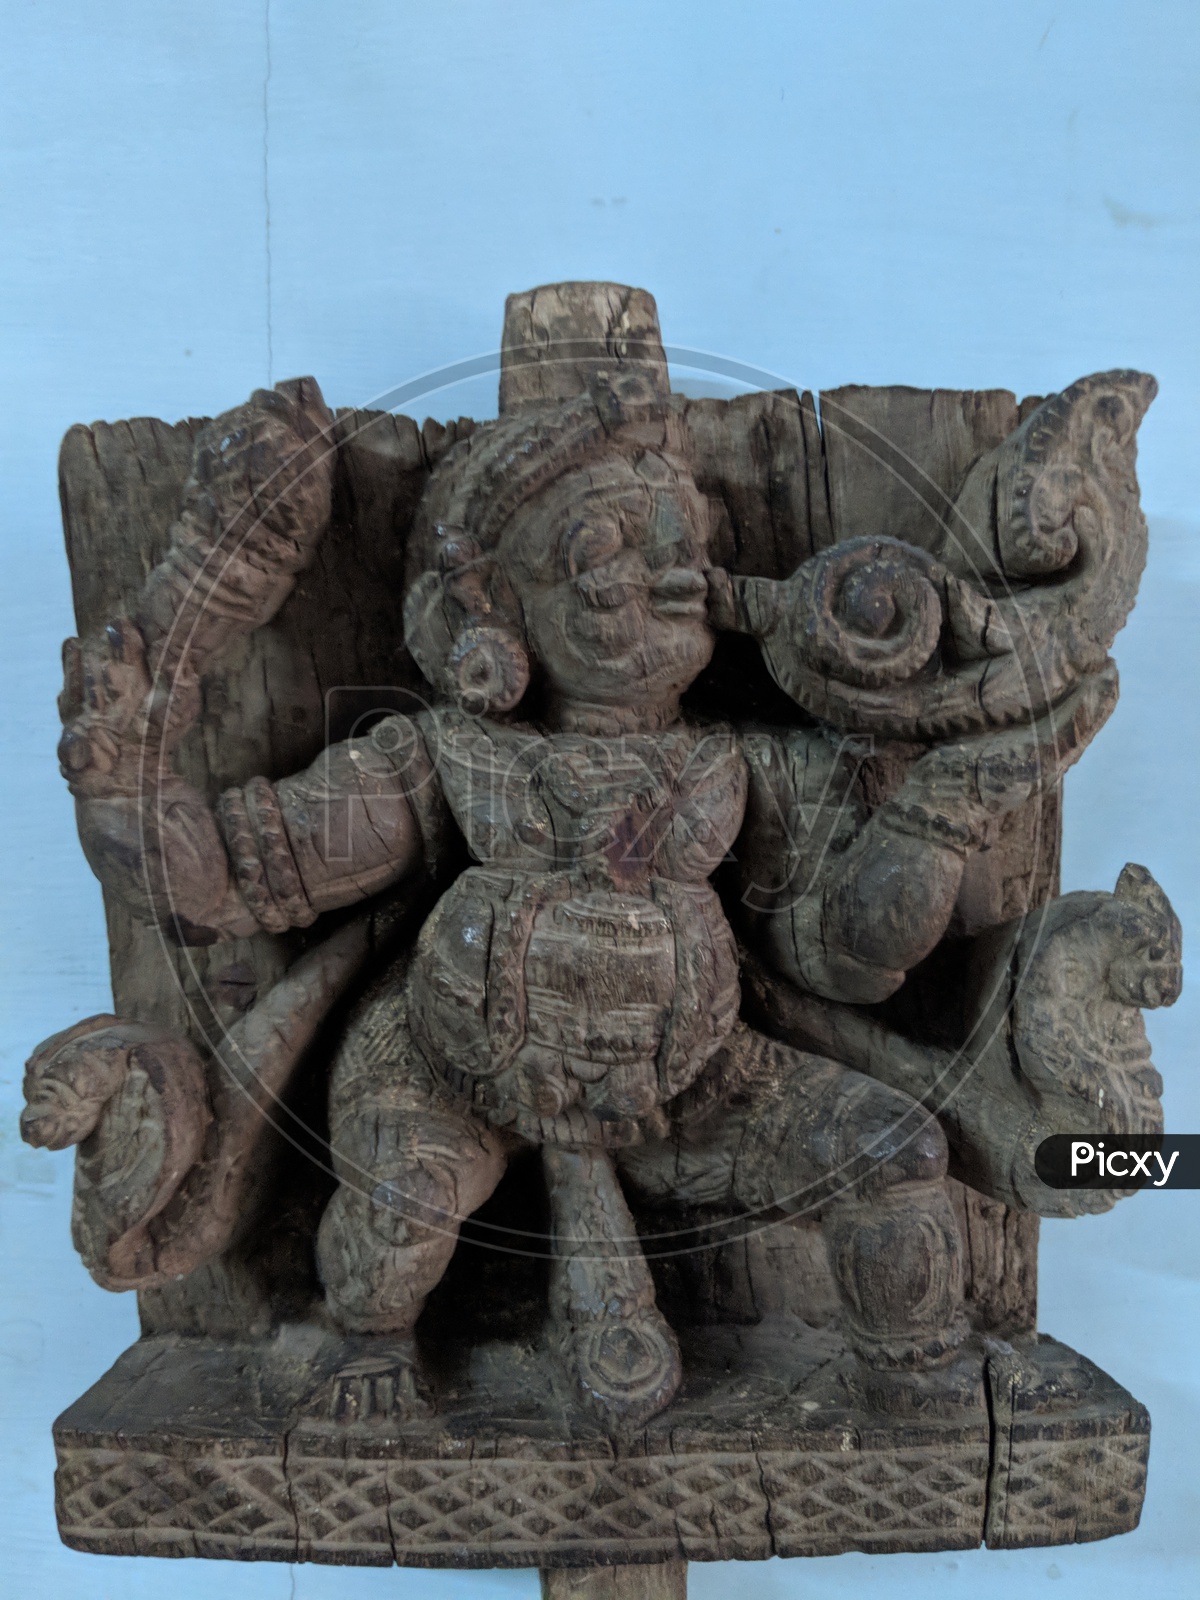 Statues in Vellore Fort Museum Gallery